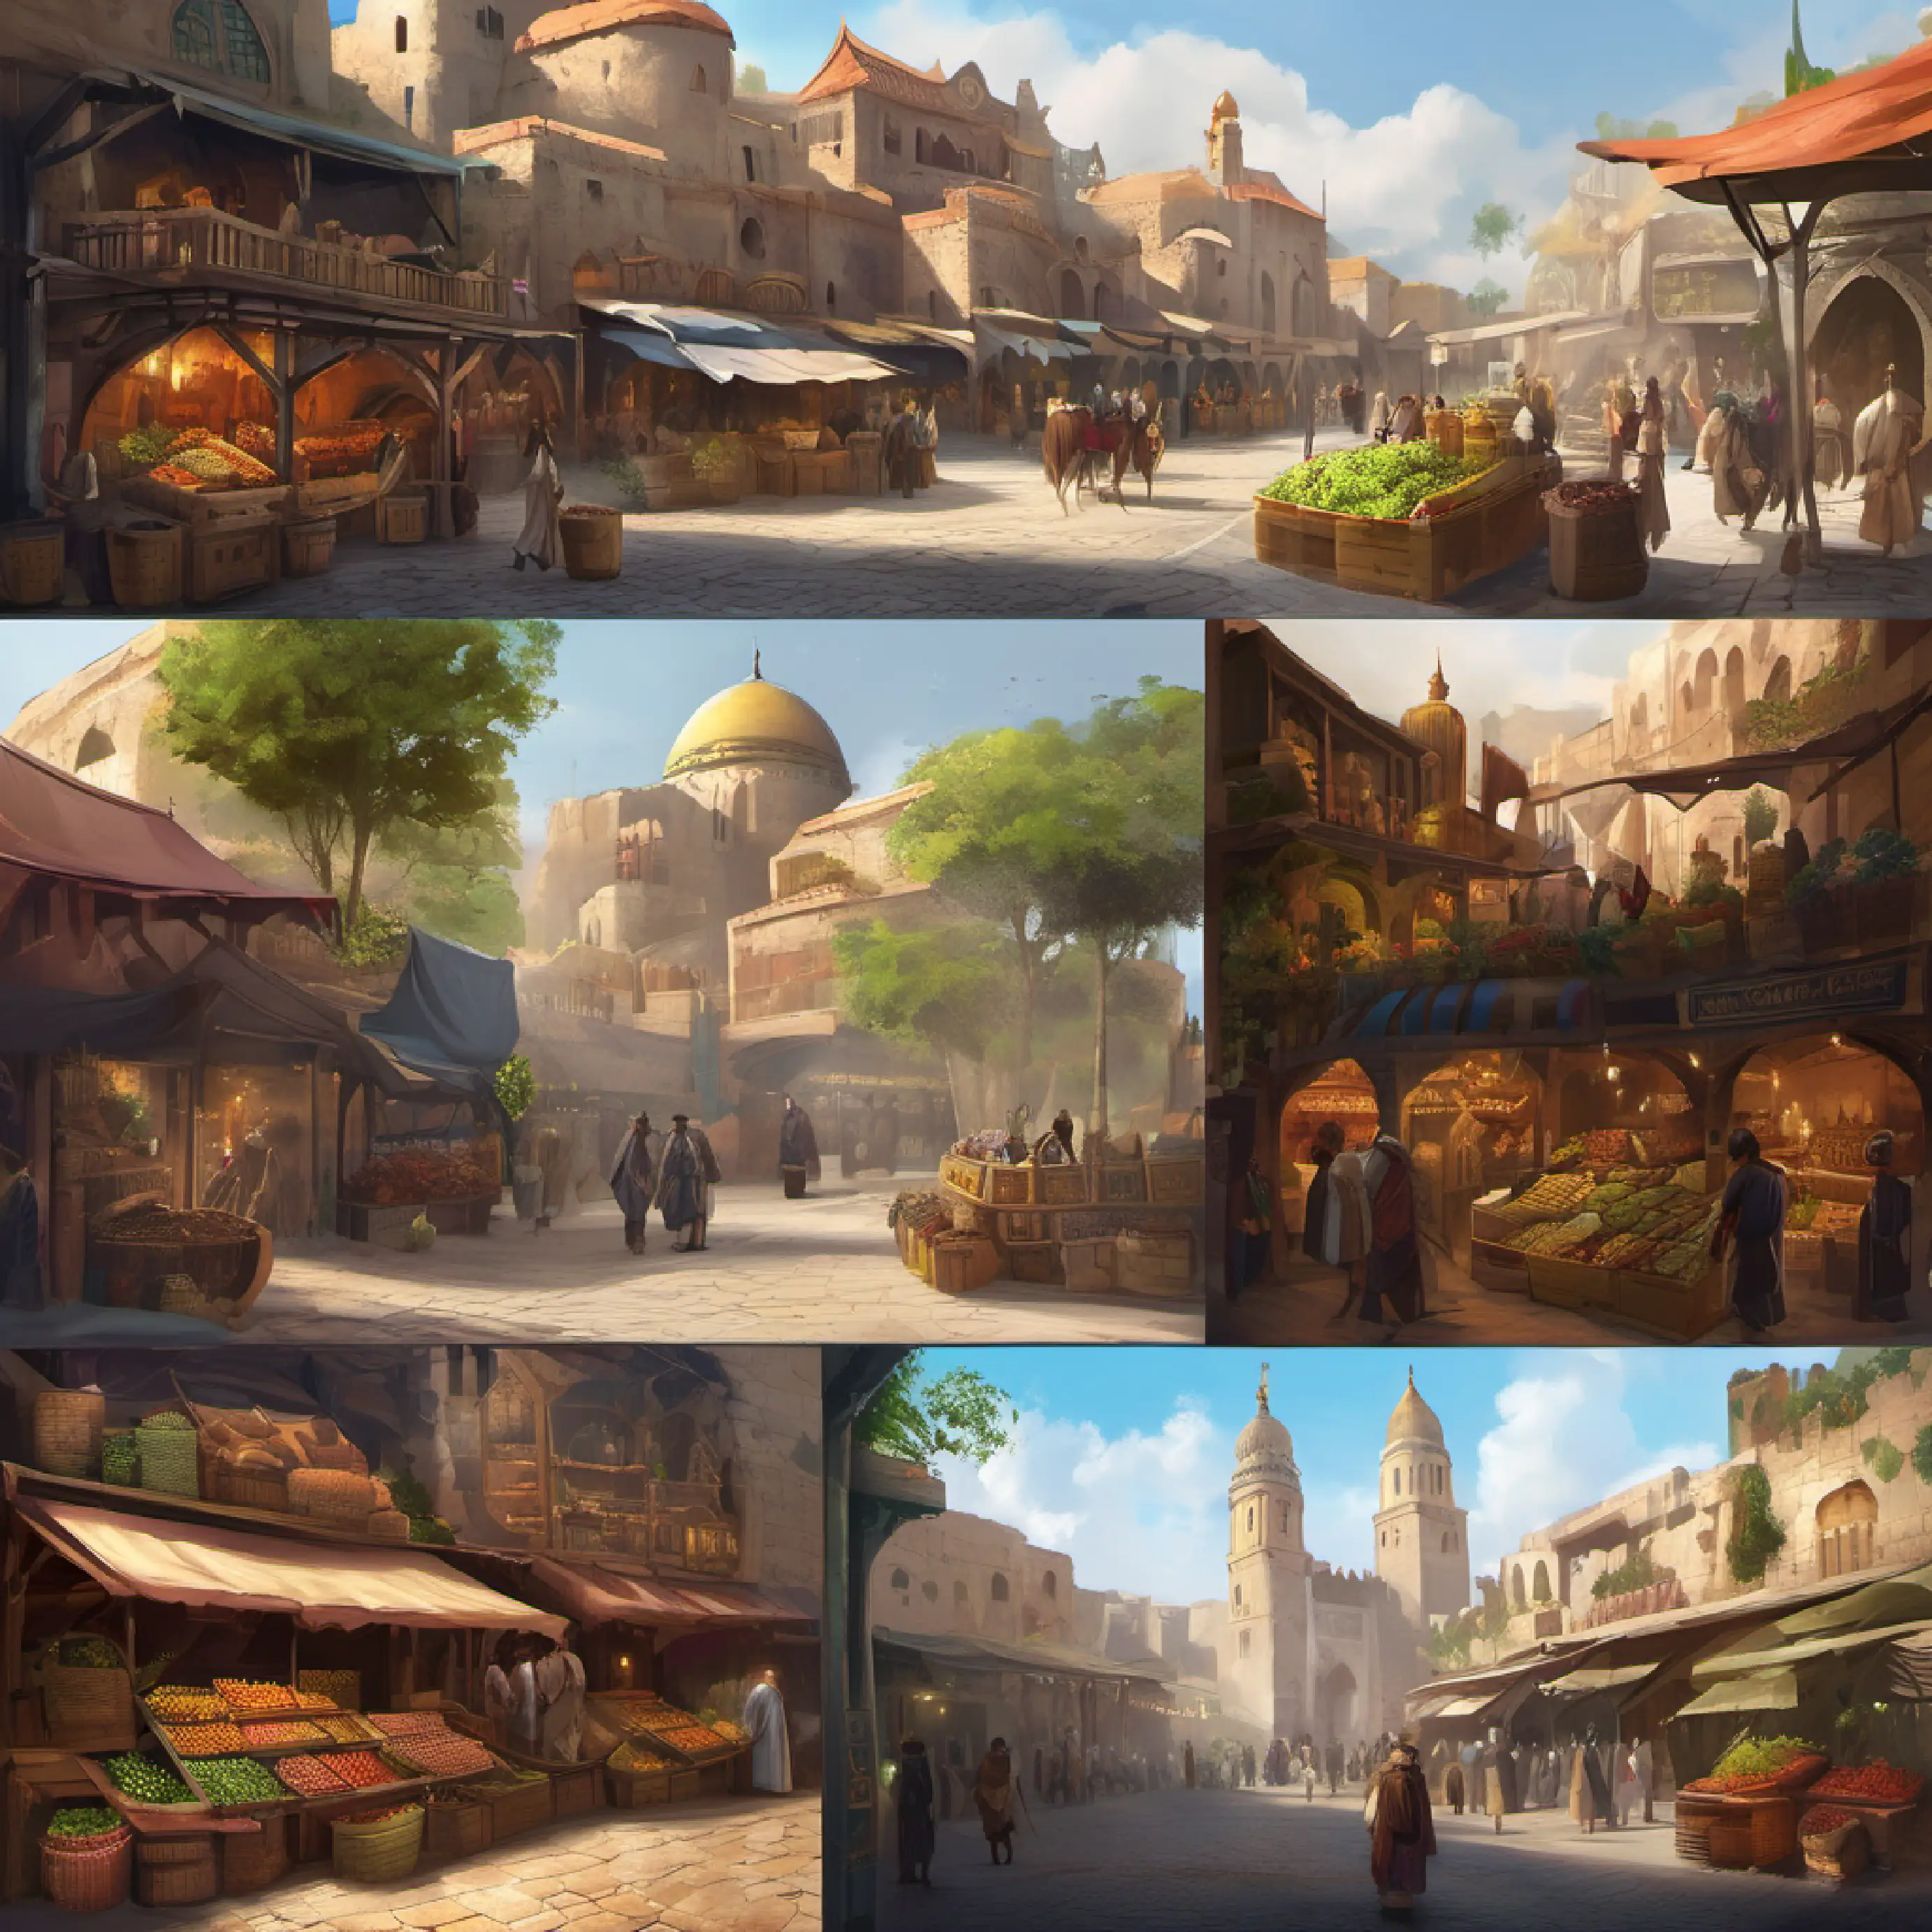 Exploring the kingdom's marketplace and its smells.